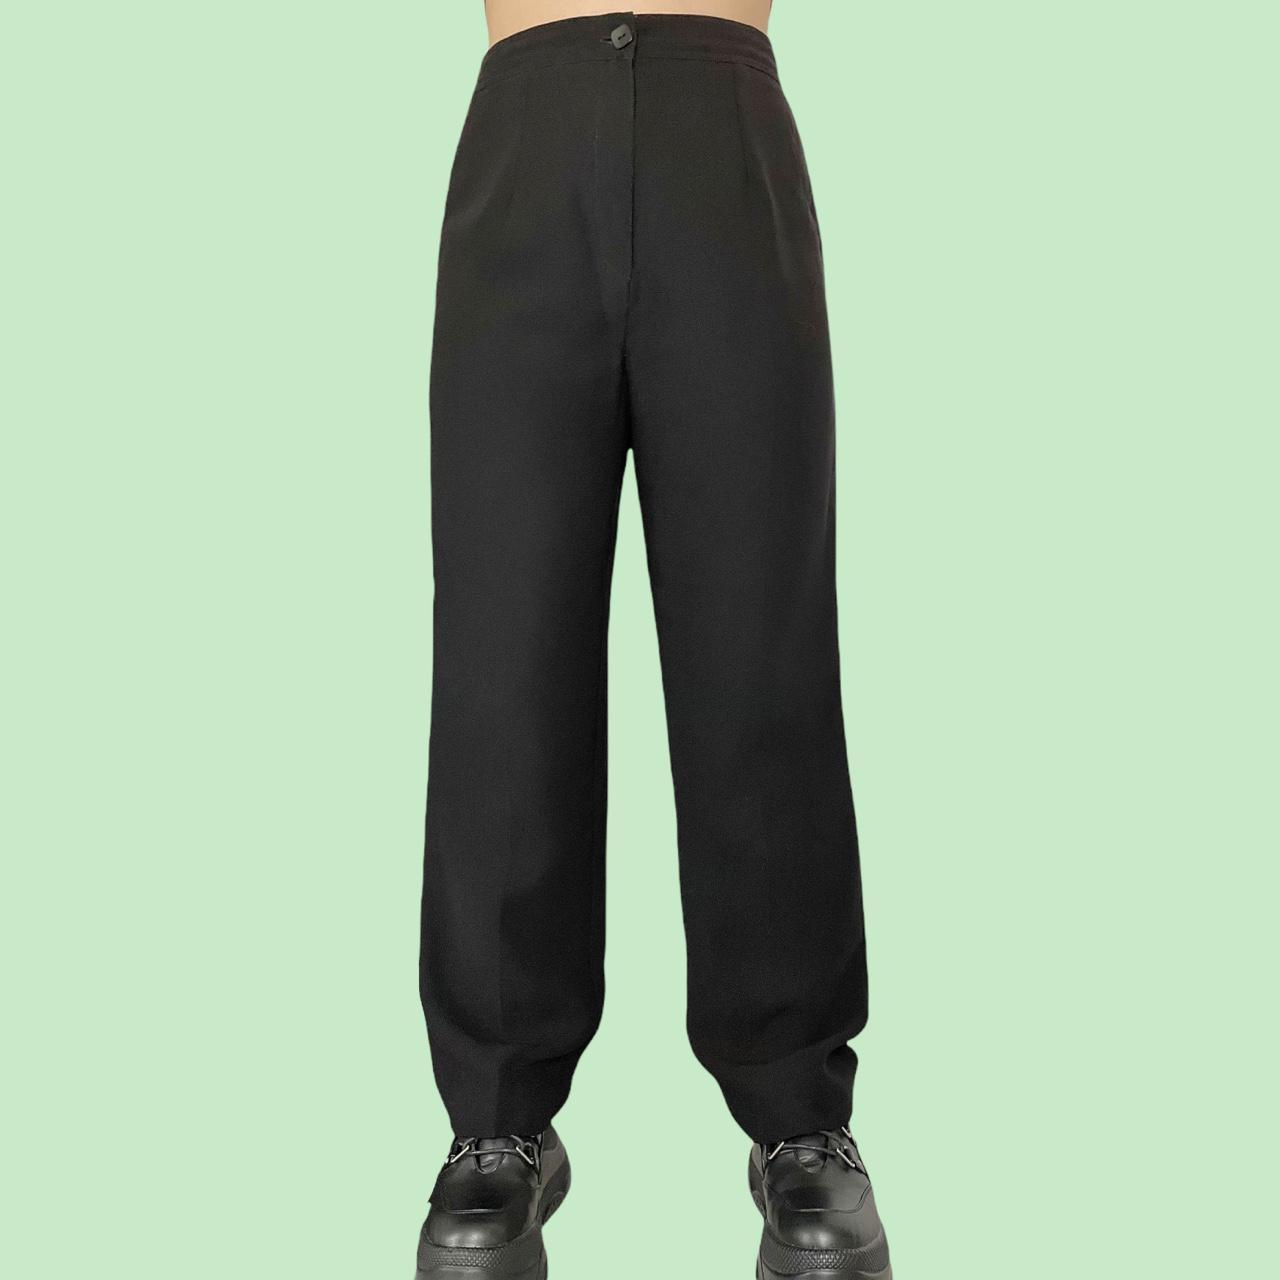 Product Image 2 - Petite black trousers

In excellent vintage